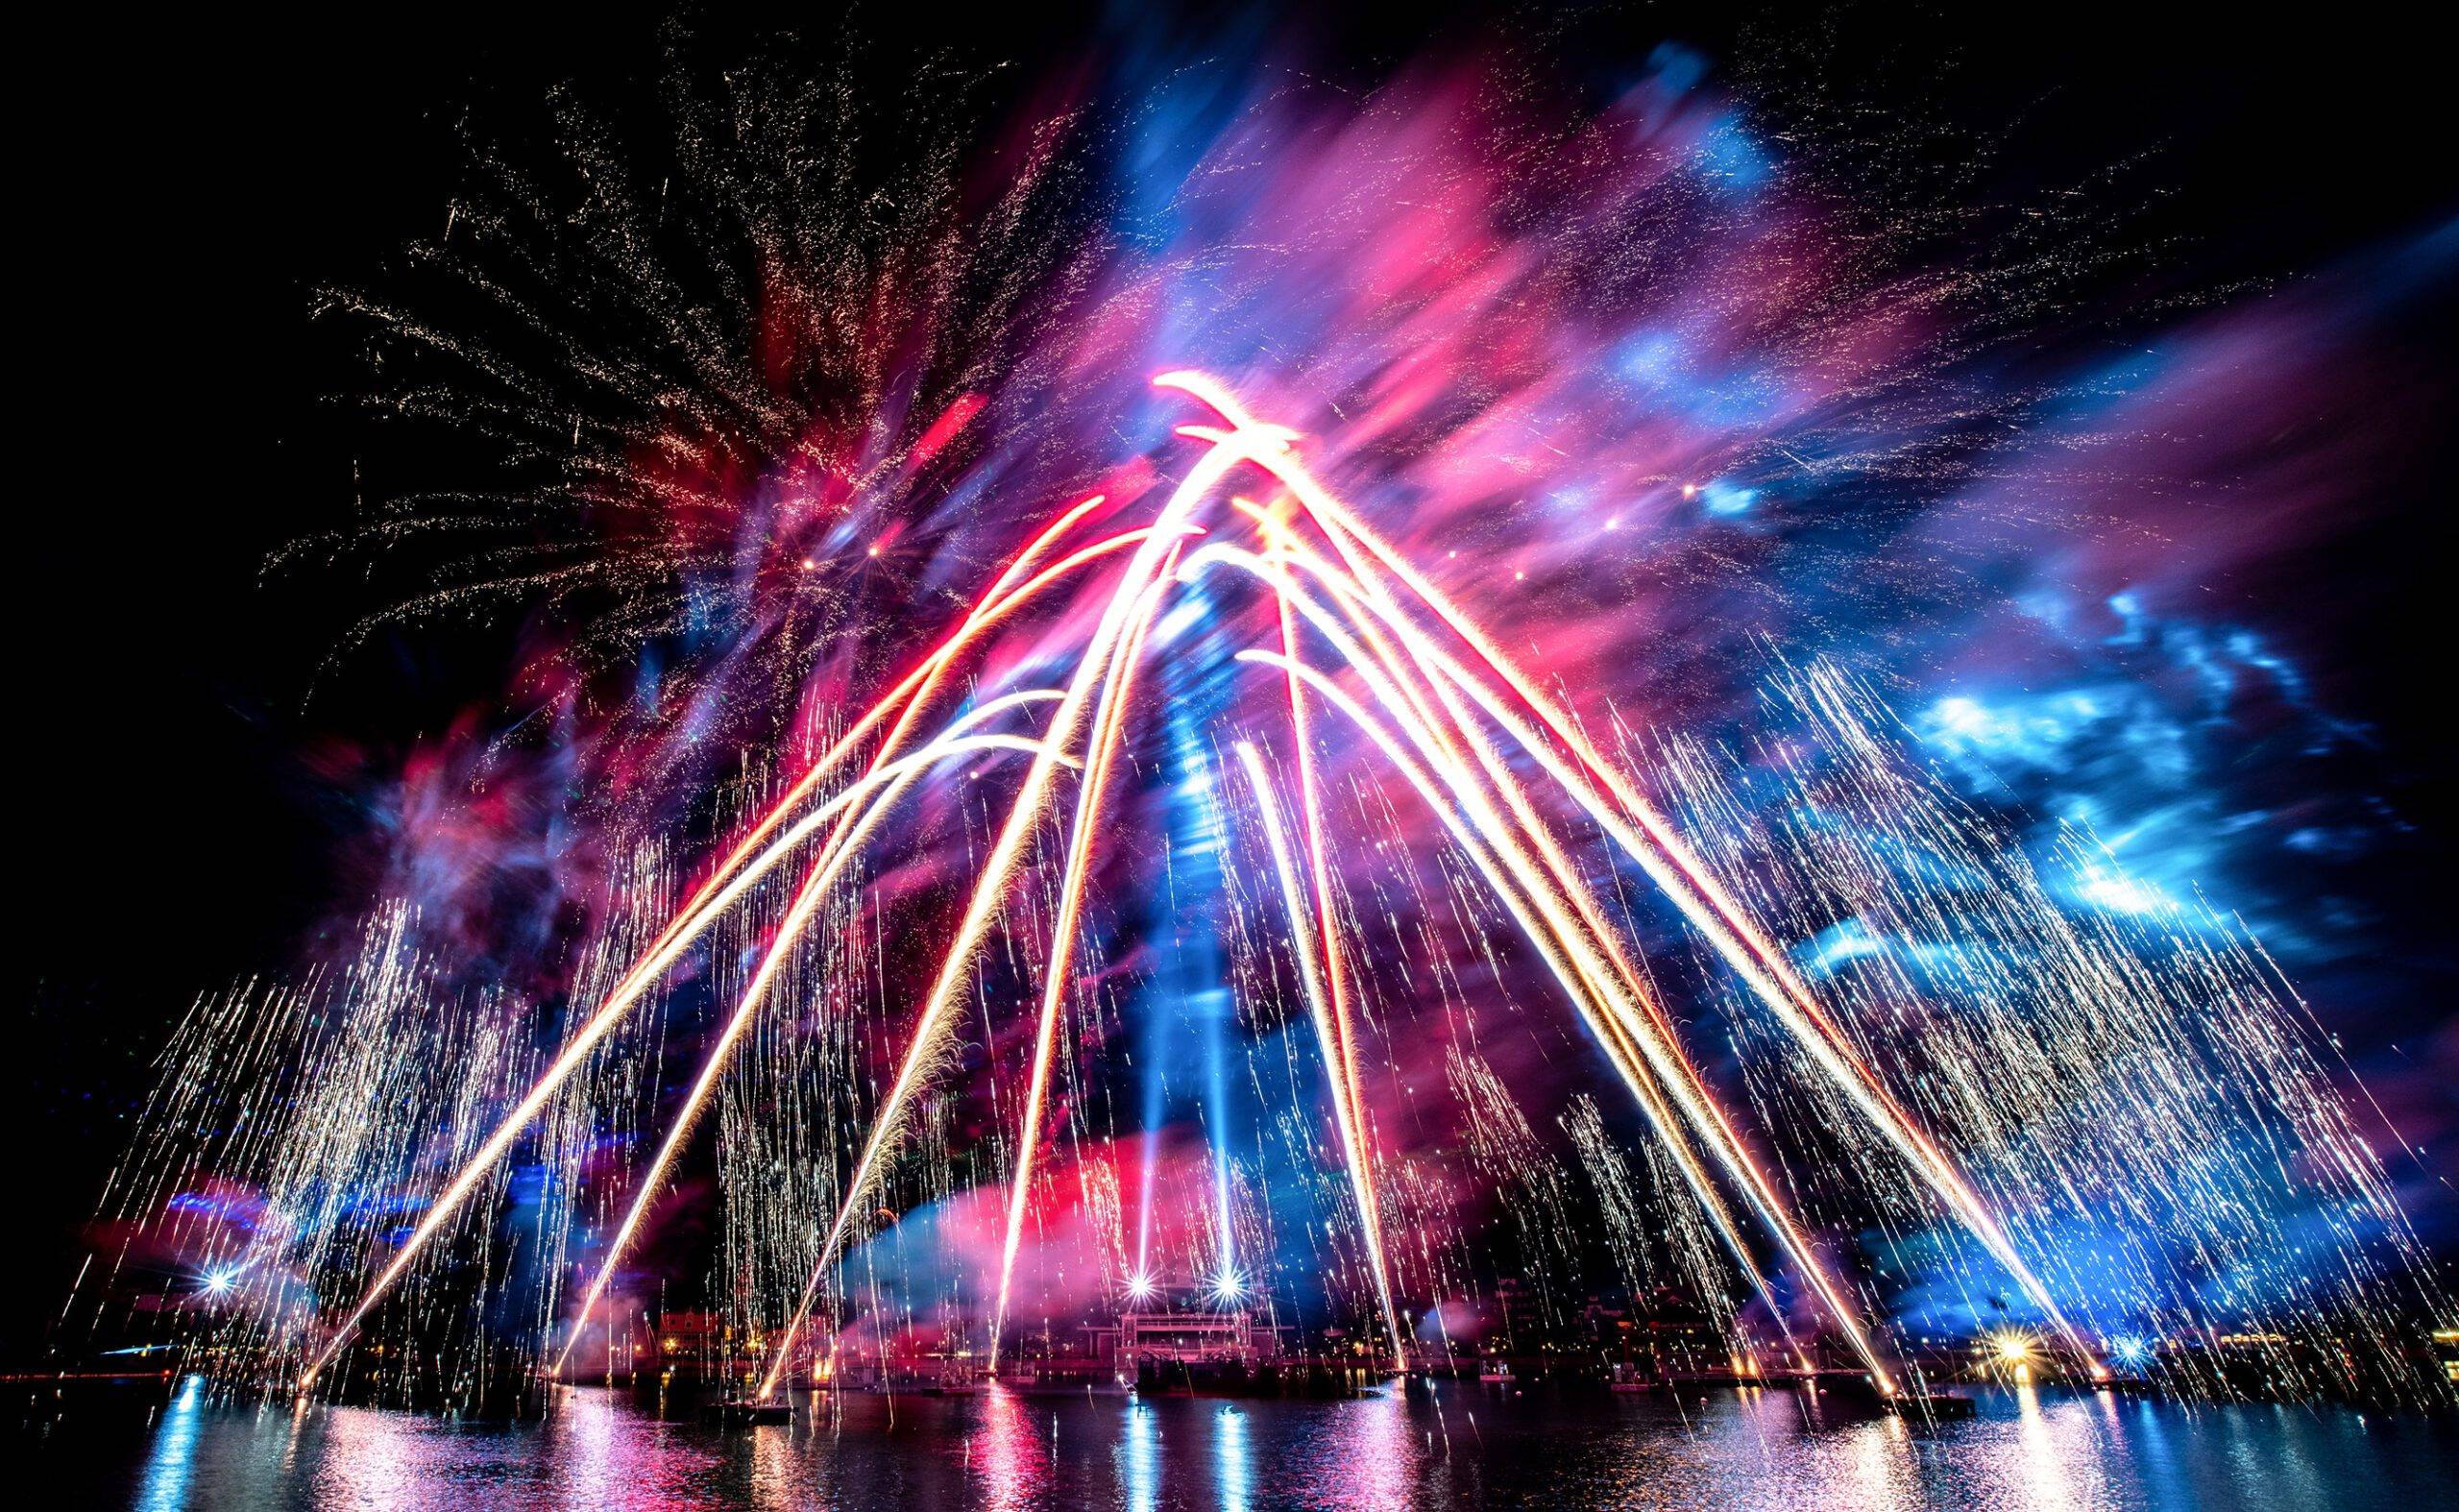 EPCOT Forever will be shown at EPCOT on July 4